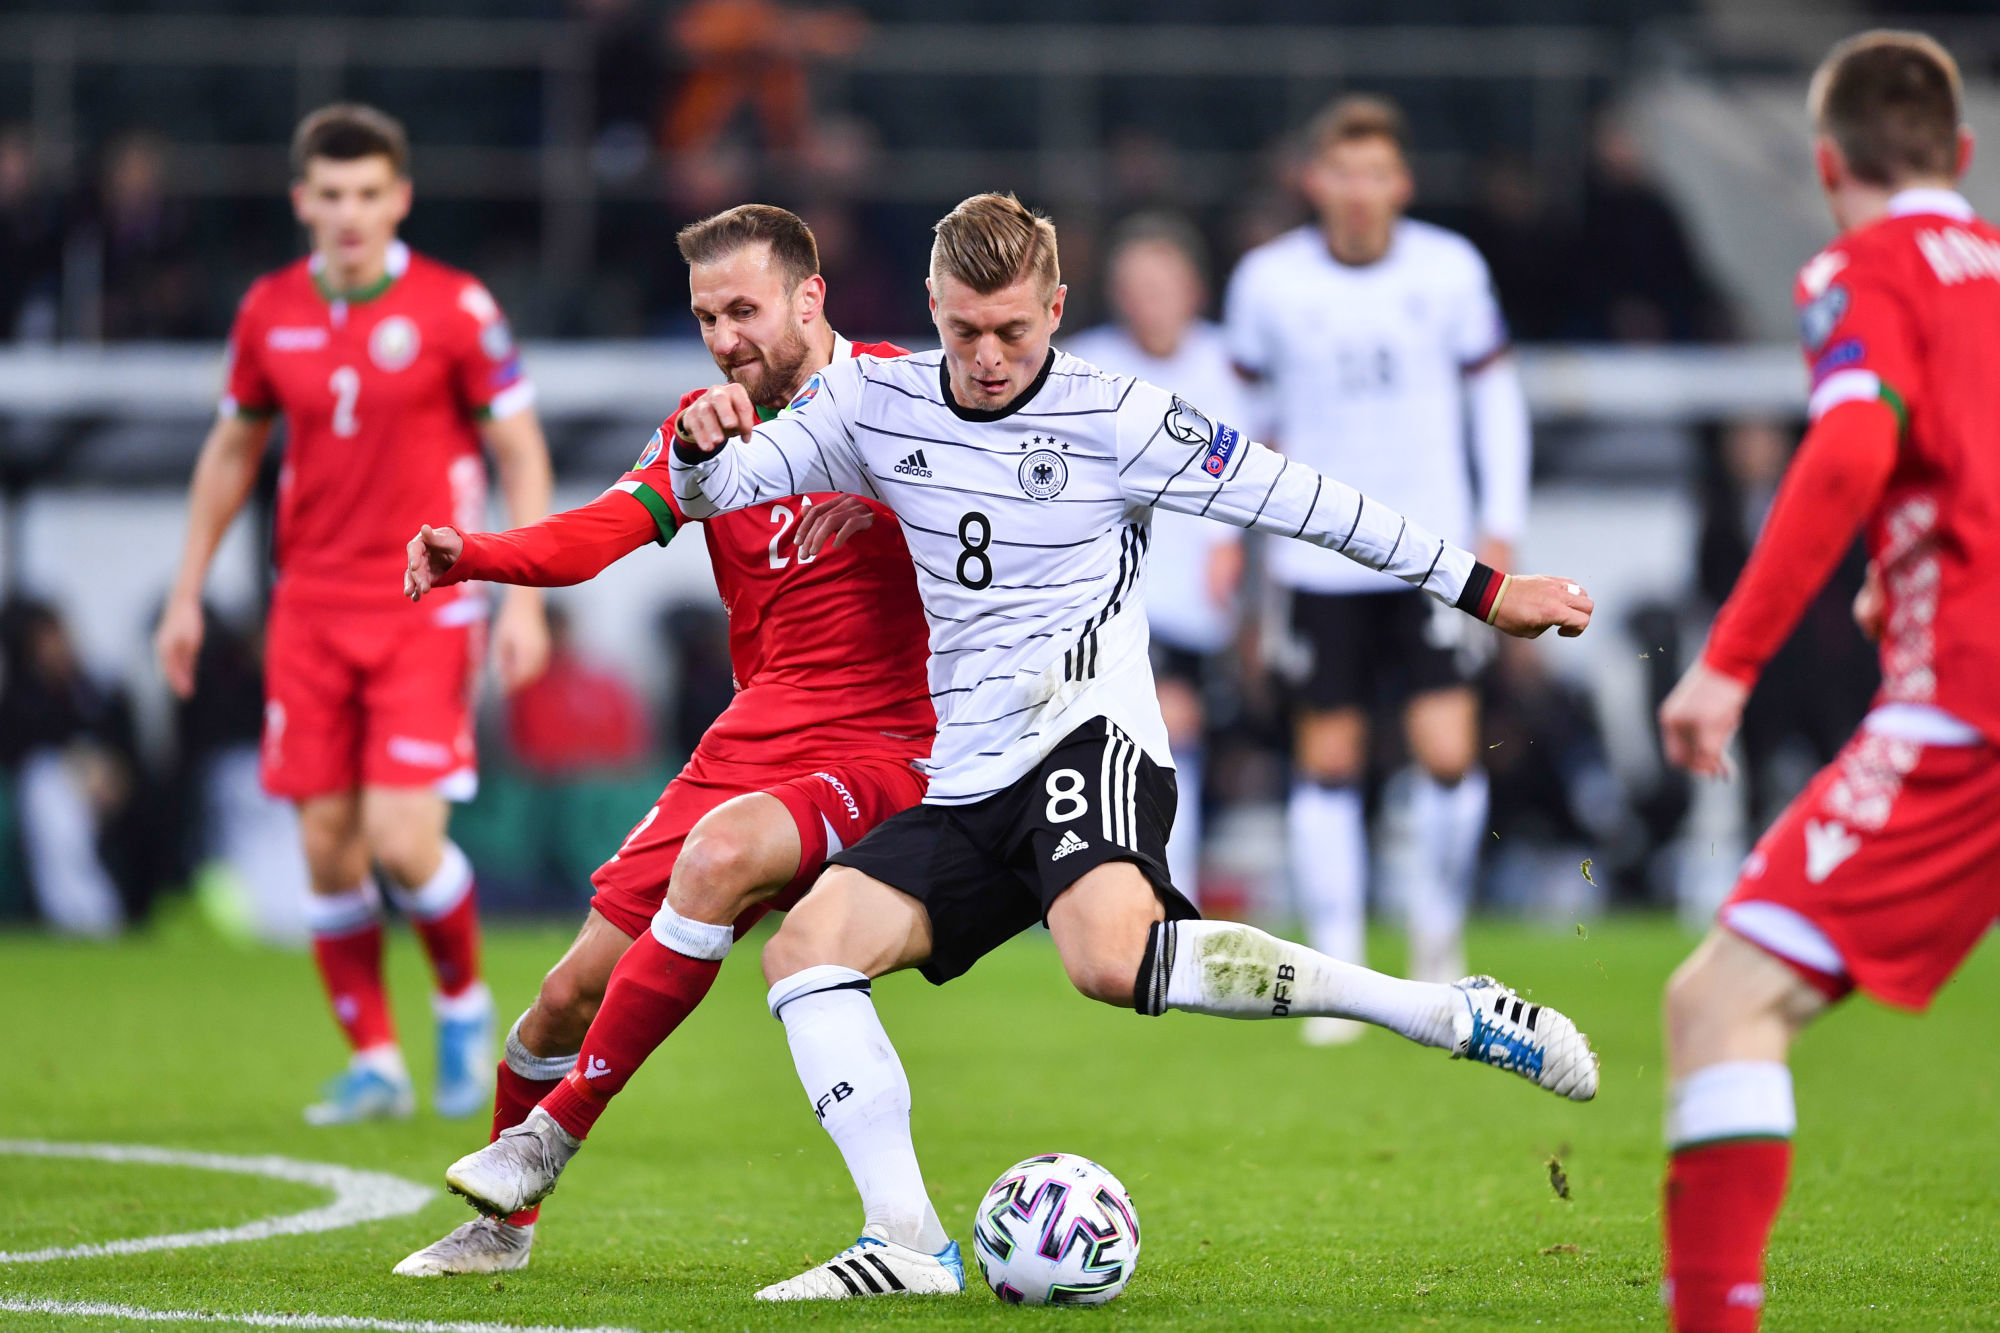 16 November 2019, North Rhine-Westphalia, Mˆnchengladbach: Soccer: European Championship qualification, Germany - Belarus, Group stage, Group C, 9th matchday in the stadium in Borussia-Park. Germany's Toni Kroos (r) and Belarus's Igor Stasewitsch (Igor Stasevich) fight for the ball. IMPORTANT NOTE: In accordance with the requirements of the DFL Deutsche Fu?ball Liga or the DFB Deutscher Fu?ball-Bund, it is prohibited to use or have used photographs taken in the stadium and/or the match in the form of sequence images and/or video-like photo sequences. Photo: Marius Becker/dpa 

Photo by Icon Sport - Toni KROOS - Ihar STASEVICH - Borussia-Park - Monchengladbach (Allemagne)